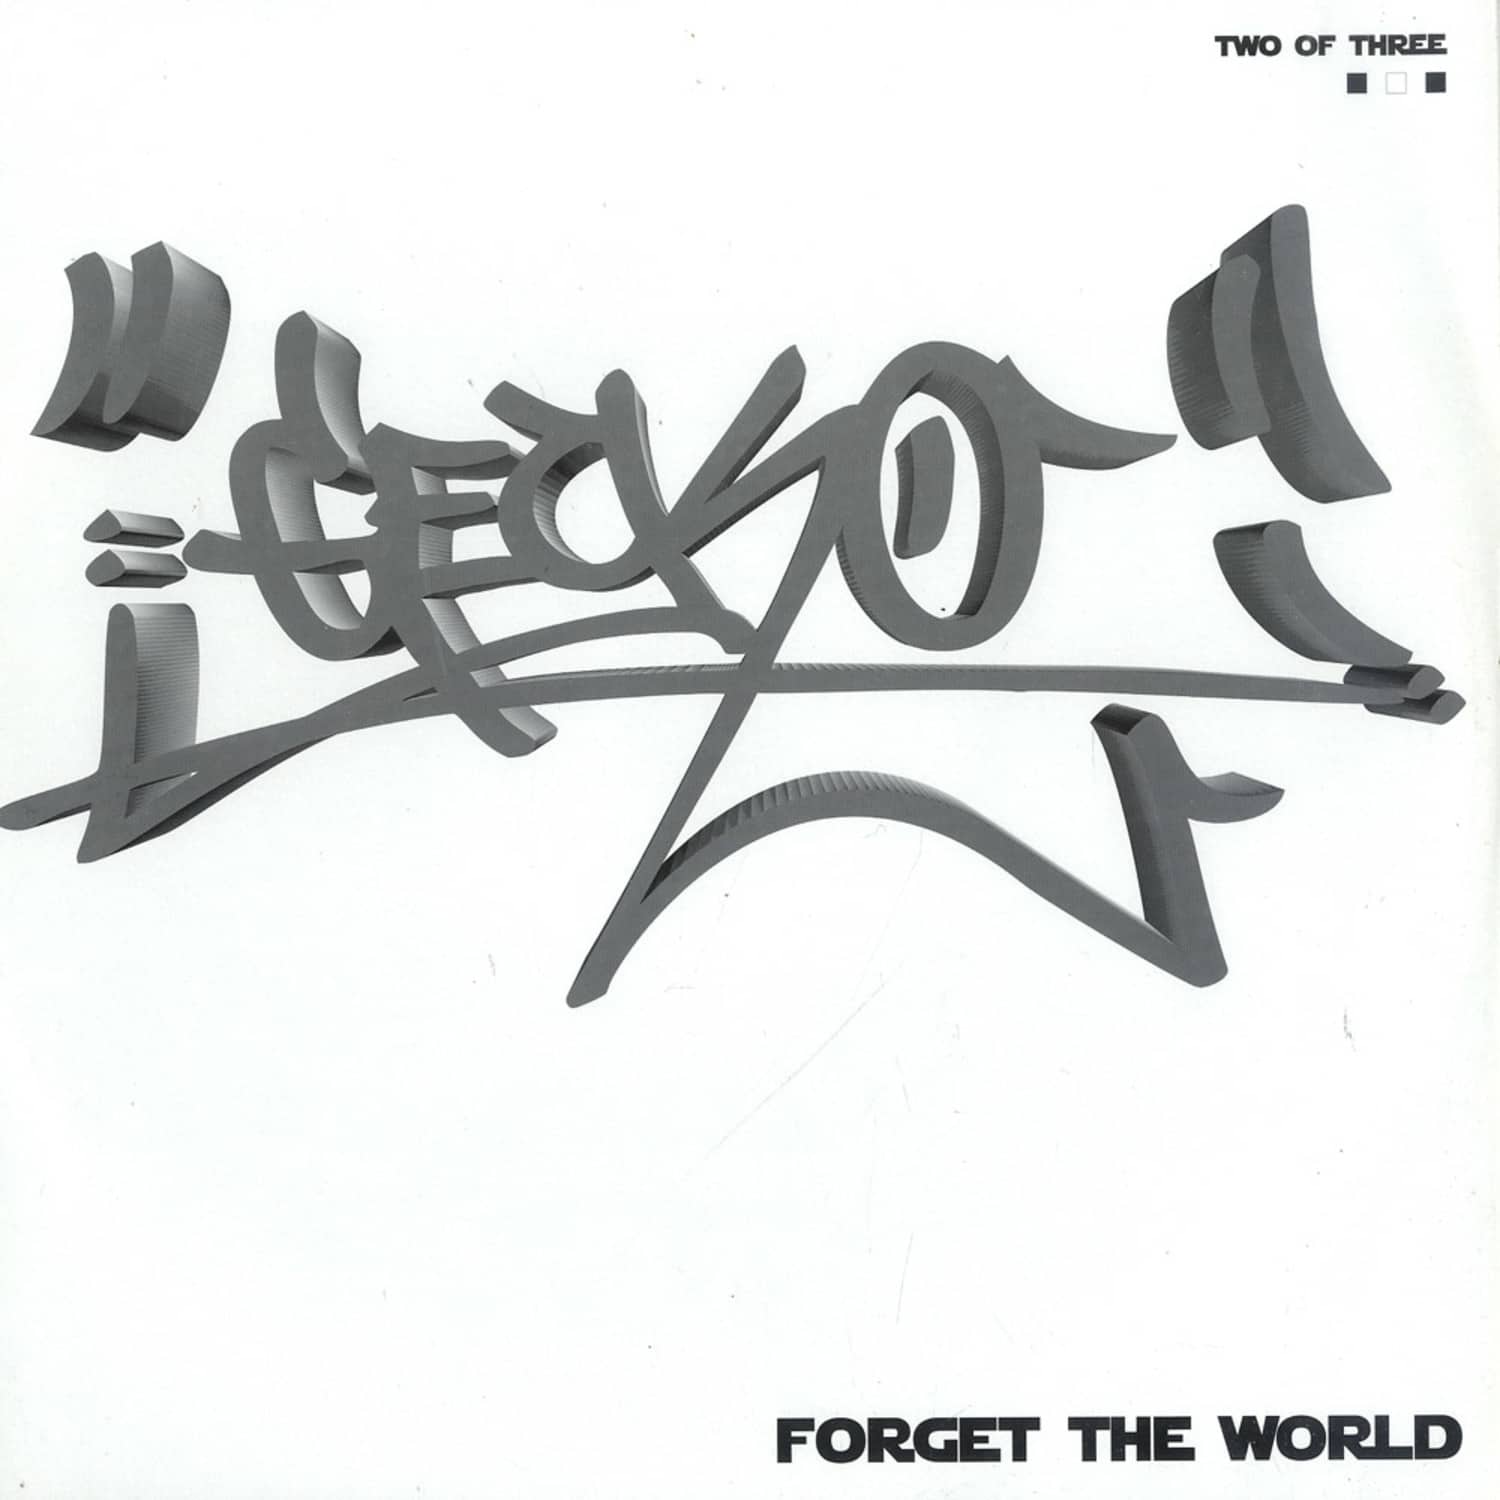 Gecko - FORGET THE WORLD - RECORD 2